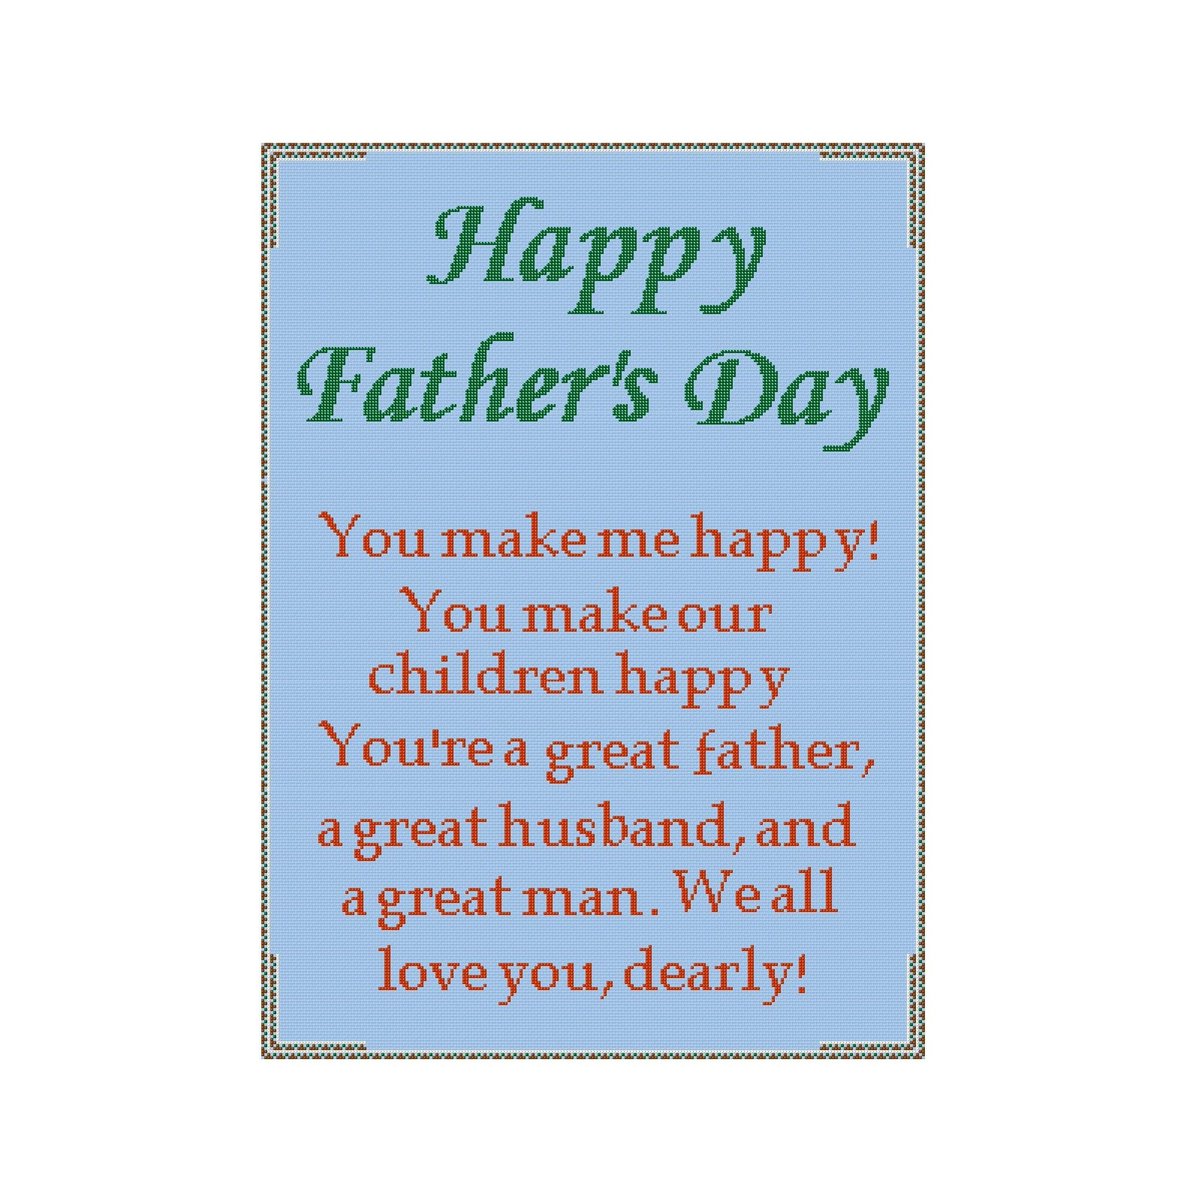 Happy Fathers Day Dad Love Cross Stitch Pattern Instant Pdf File Chart 4 Counted Greeting Card Digital Download Easy Diy Gift Idea tuppu.net/ad9d3661 #Etsy #Crossstitchfurnish #PdfCrossStitch